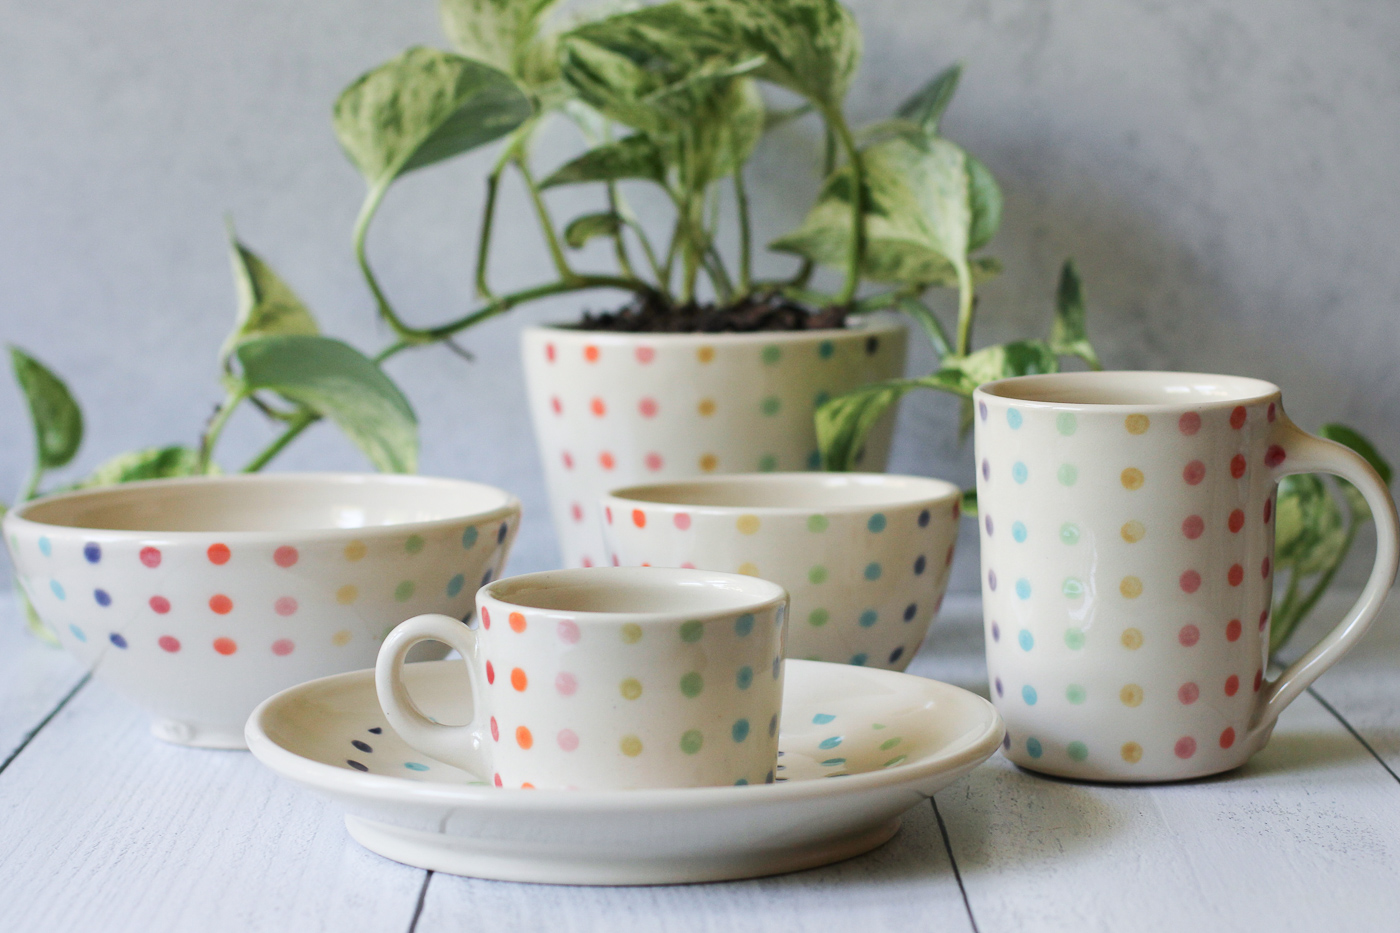 Candy Dot tableware